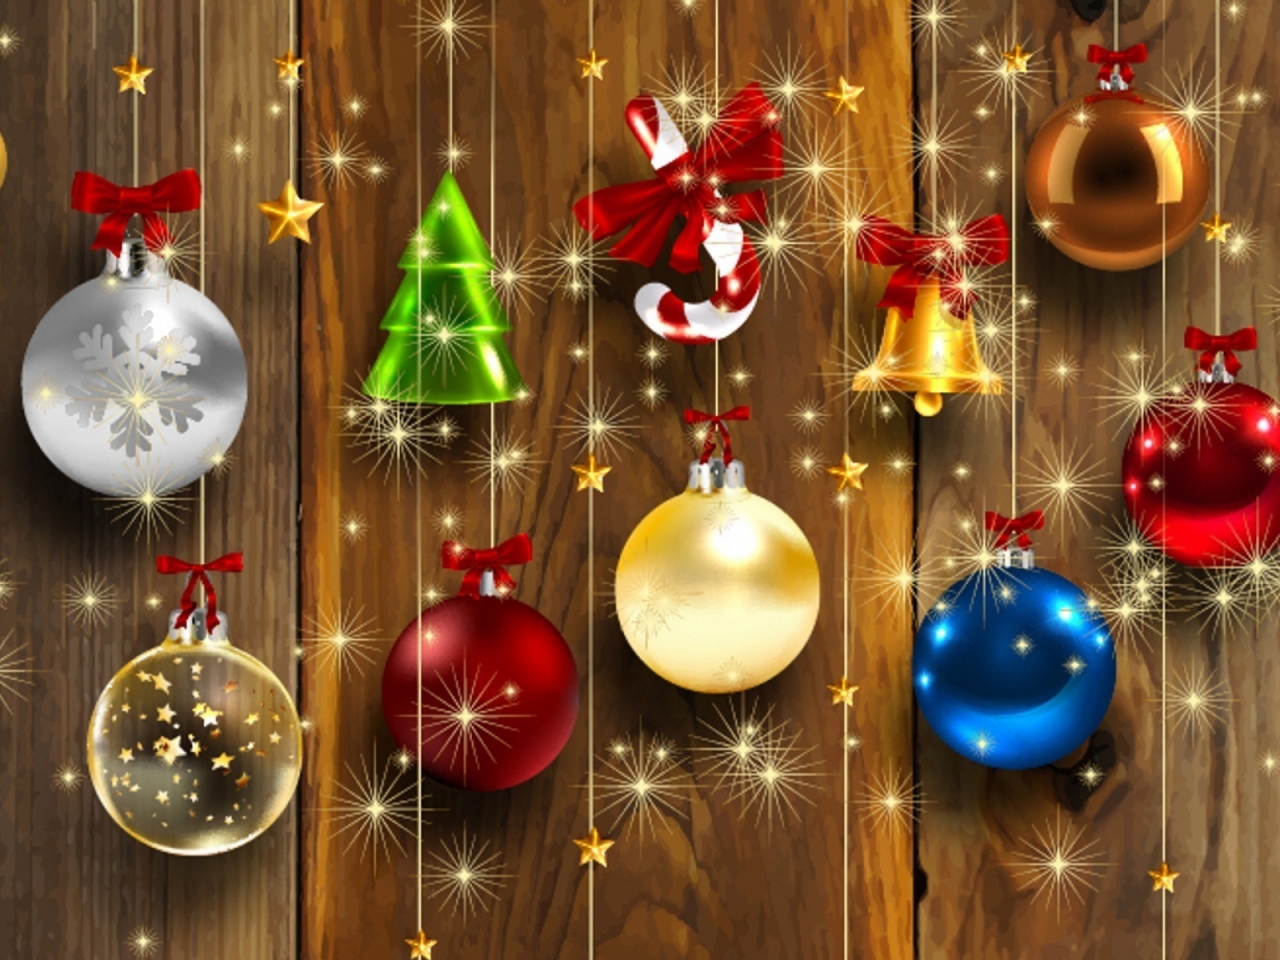 2013 Christmas Ornaments for 1280 x 960 resolution